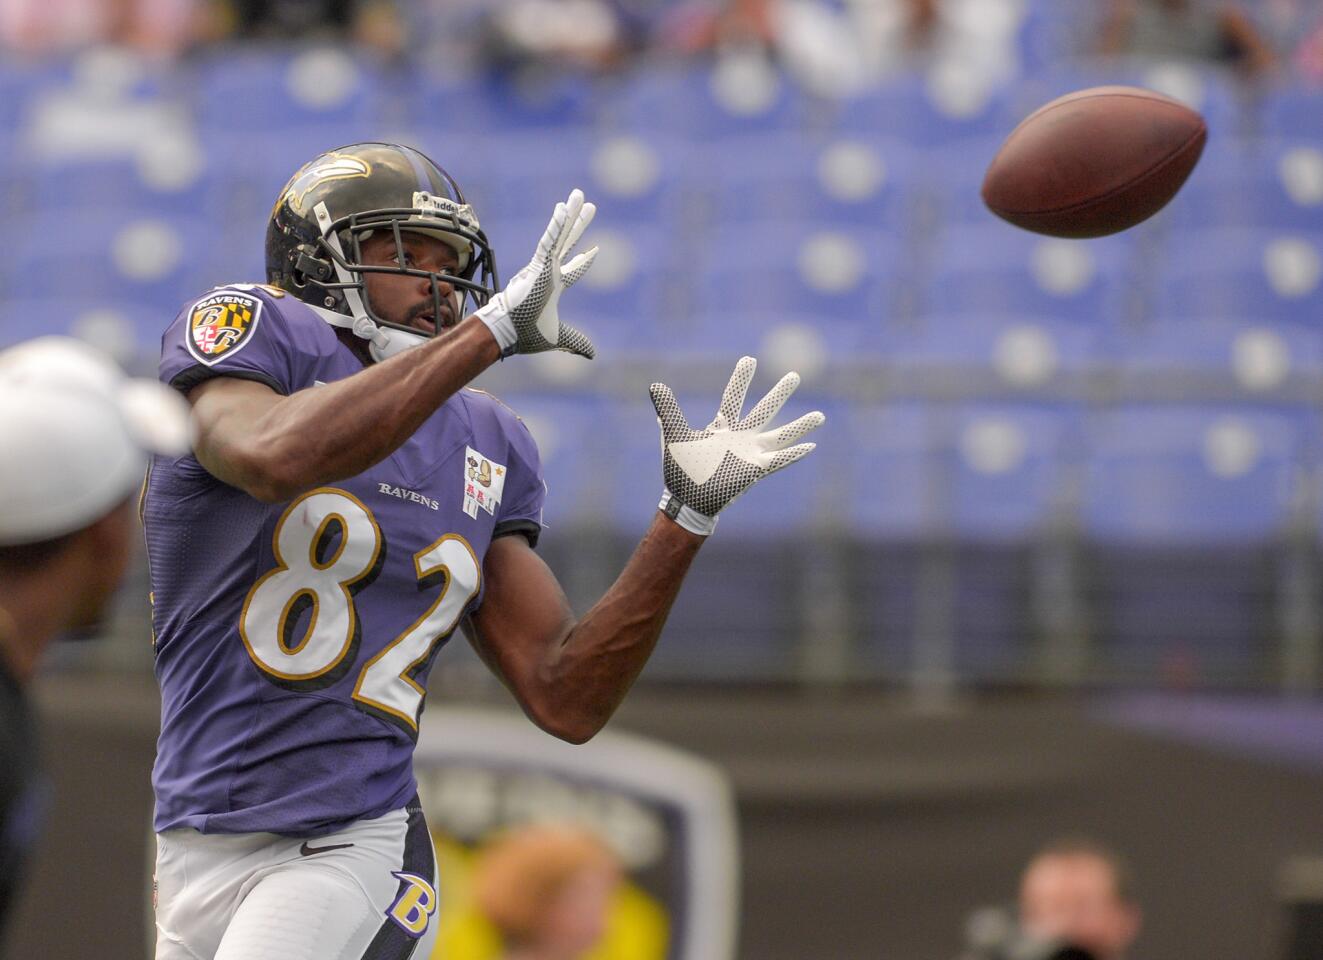 Torrey Smith at practice in 2013